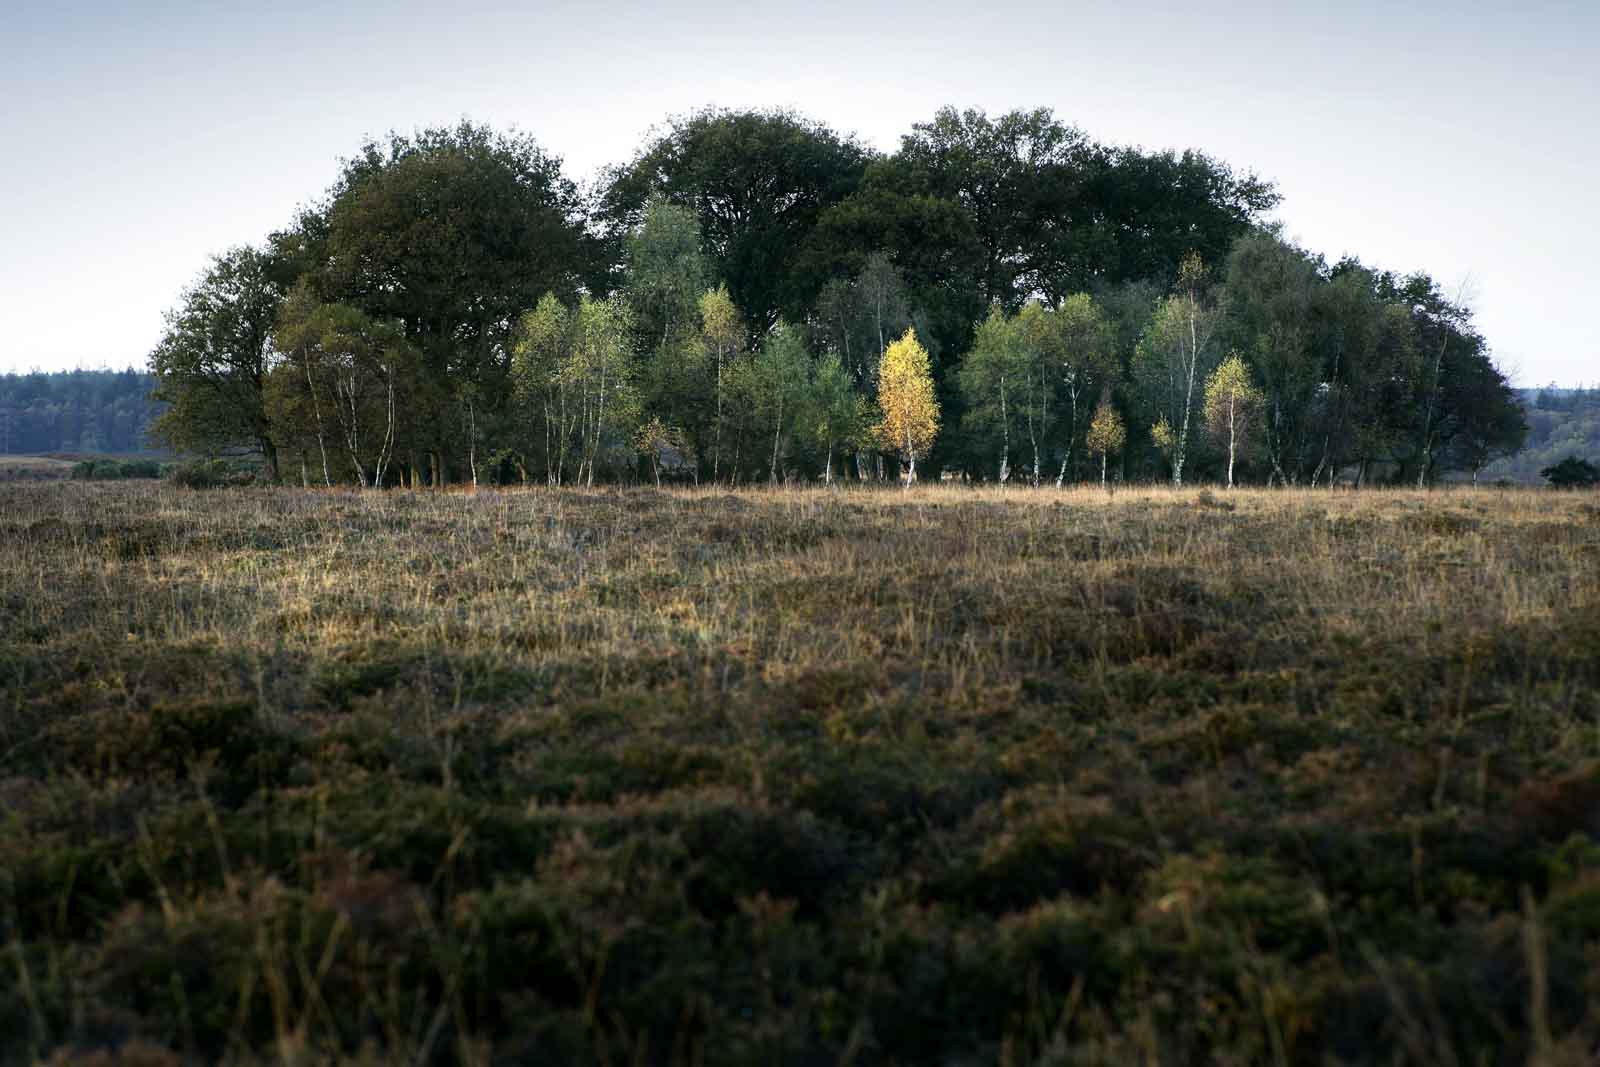 A photo of the New Forest by Paul Close